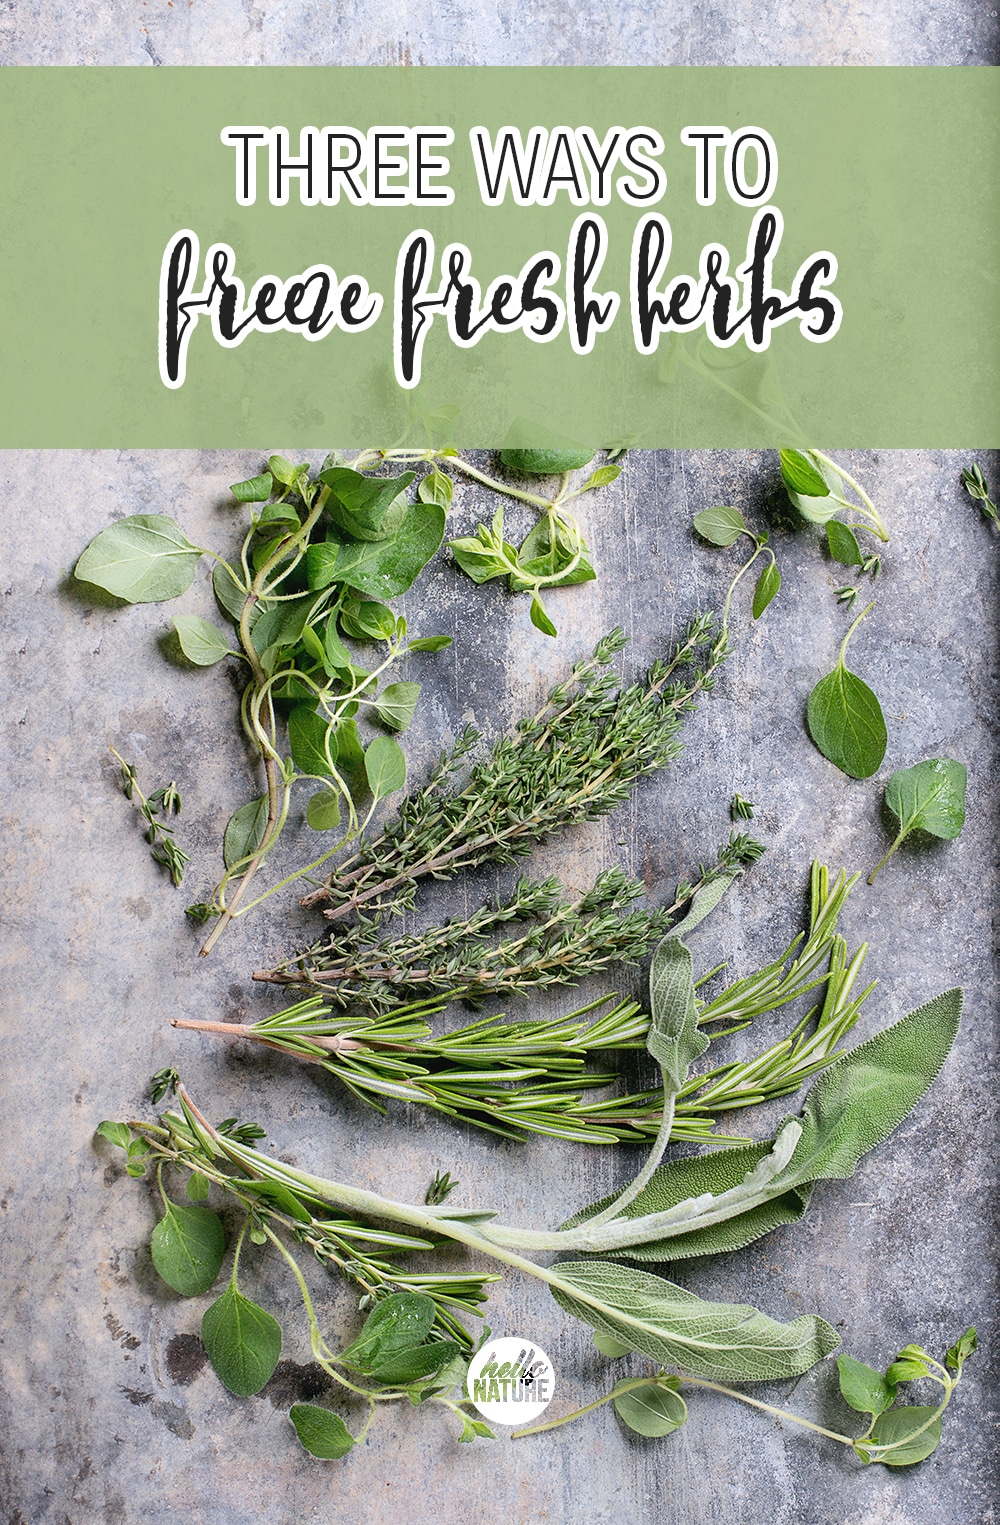 Freezing fresh herbs is one of the best ways to preserve fresh herbs! Learn how to preserve fresh herbs by freezing them in this simple guide.